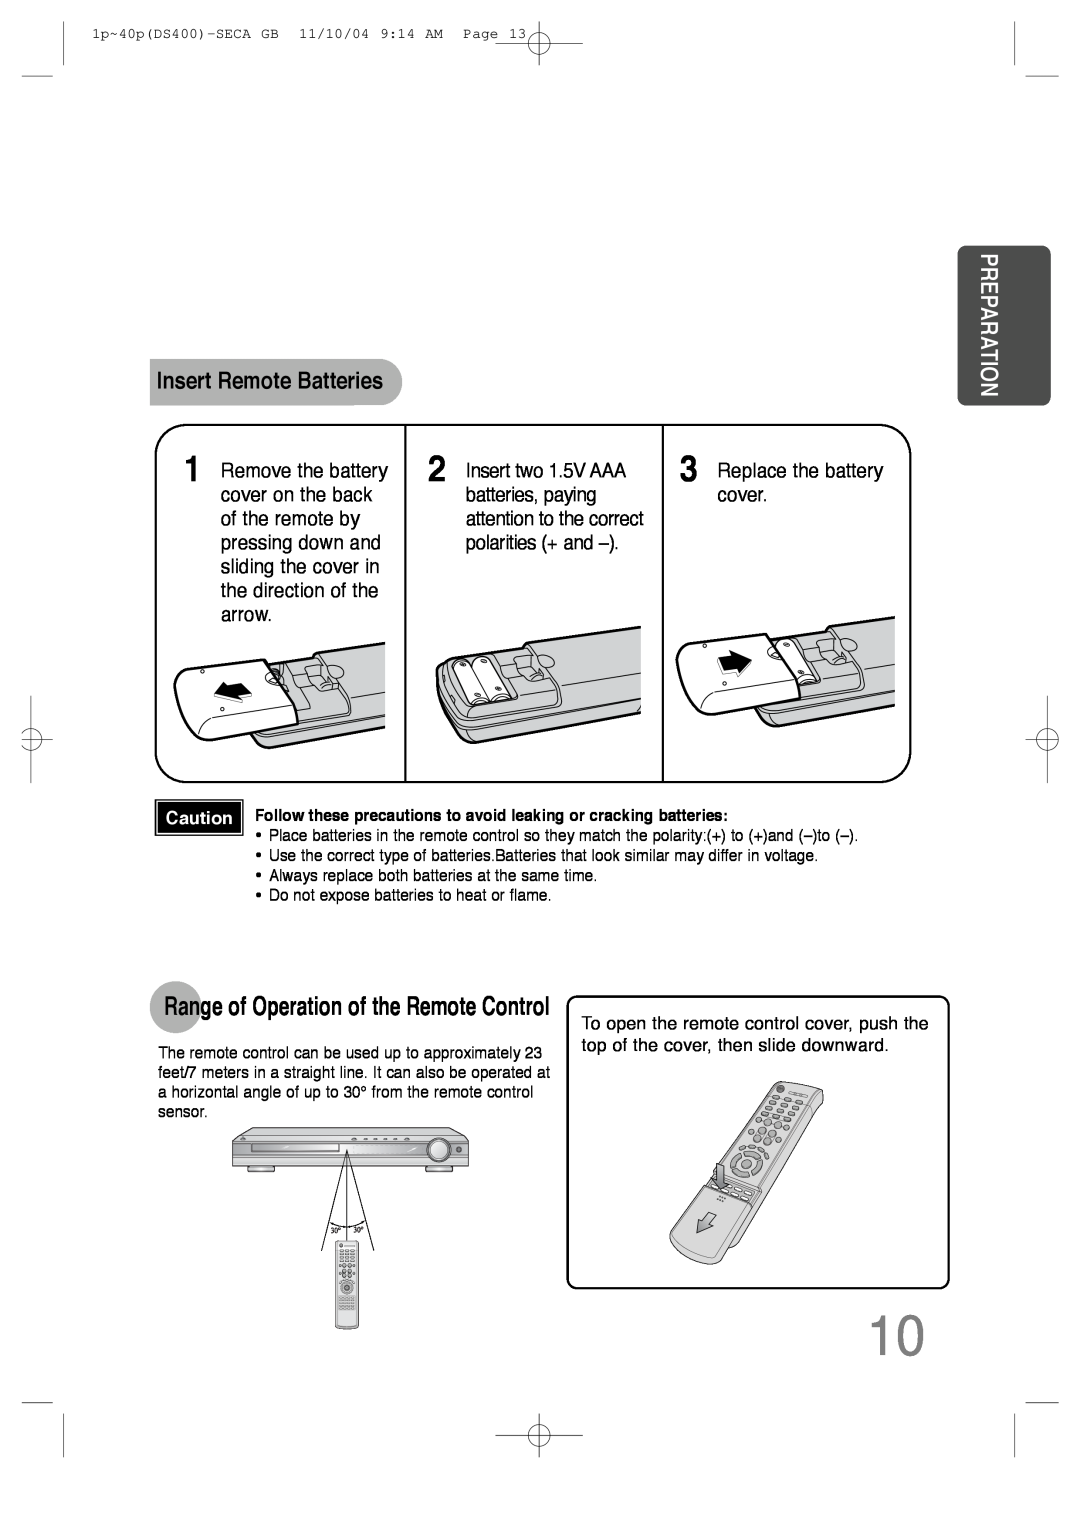 Samsung HT-DS400 instruction manual Insert Remote Batteries, Preparation, Range of Operation of the Remote Control 